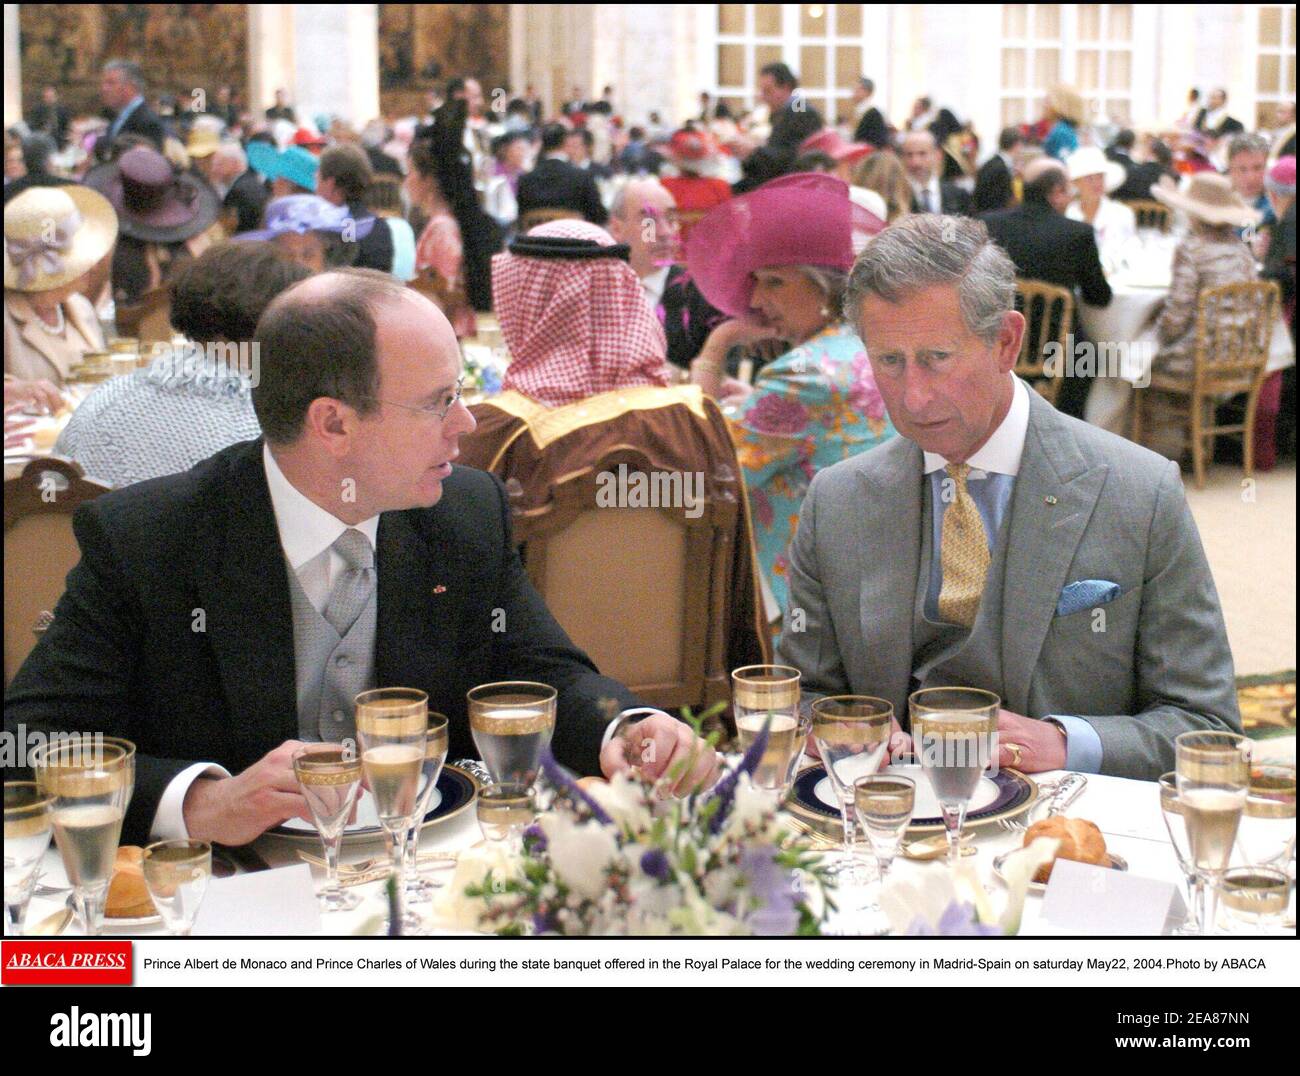 Prince Albert de Monaco and Prince Charles of Wales during the state banquet offered in the Royal Palace for the wedding ceremony in Madrid-Spain on saturday May22, 2004.Photo by ABACA Stock Photo